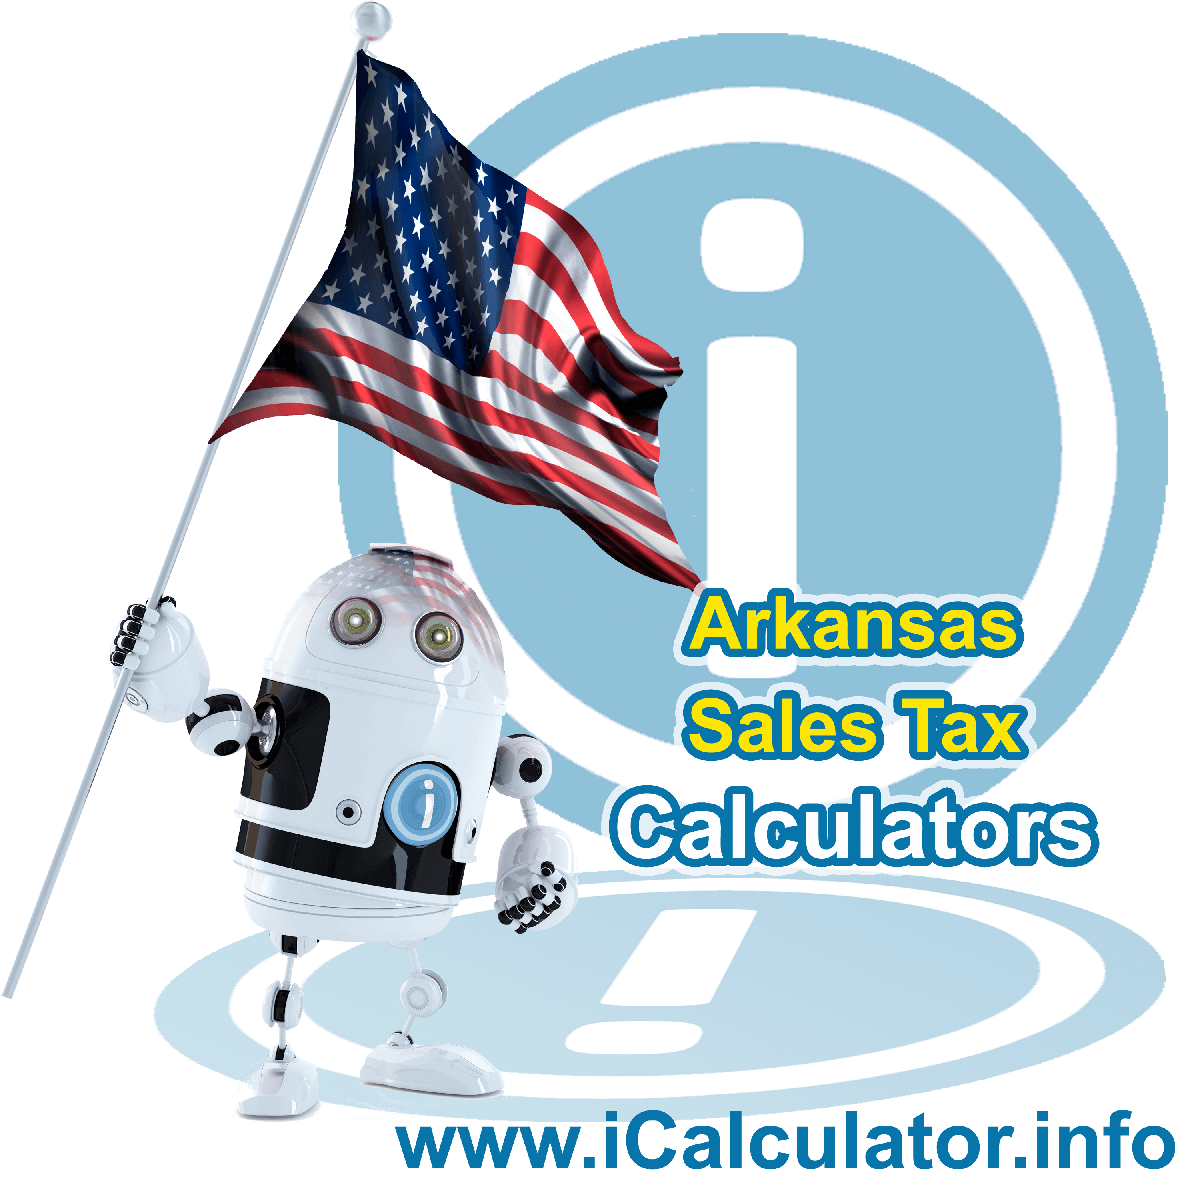 Pea Ridge Sales Rates: This image illustrates a calculator robot calculating Pea Ridge sales tax manually using the Pea Ridge Sales Tax Formula. You can use this information to calculate Pea Ridge Sales Tax manually or use the Pea Ridge Sales Tax Calculator to calculate sales tax online.